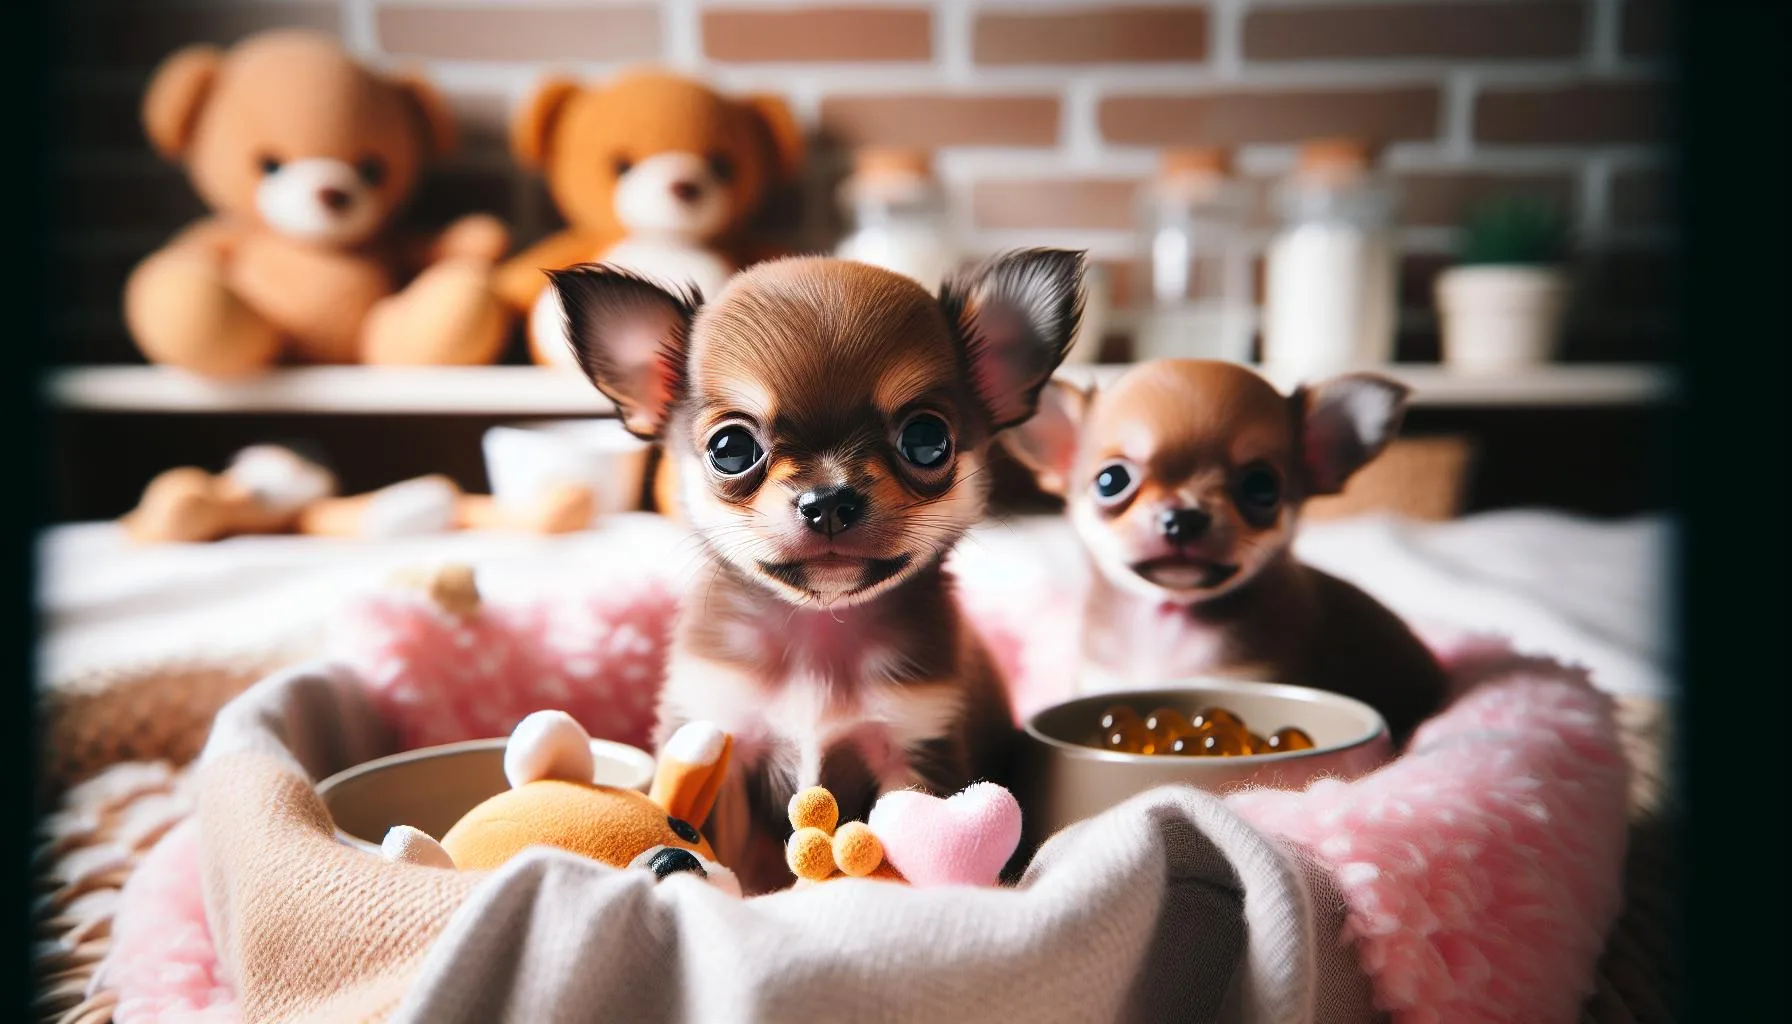 What Do Baby Chihuahuas Look Like? Find Out Here!